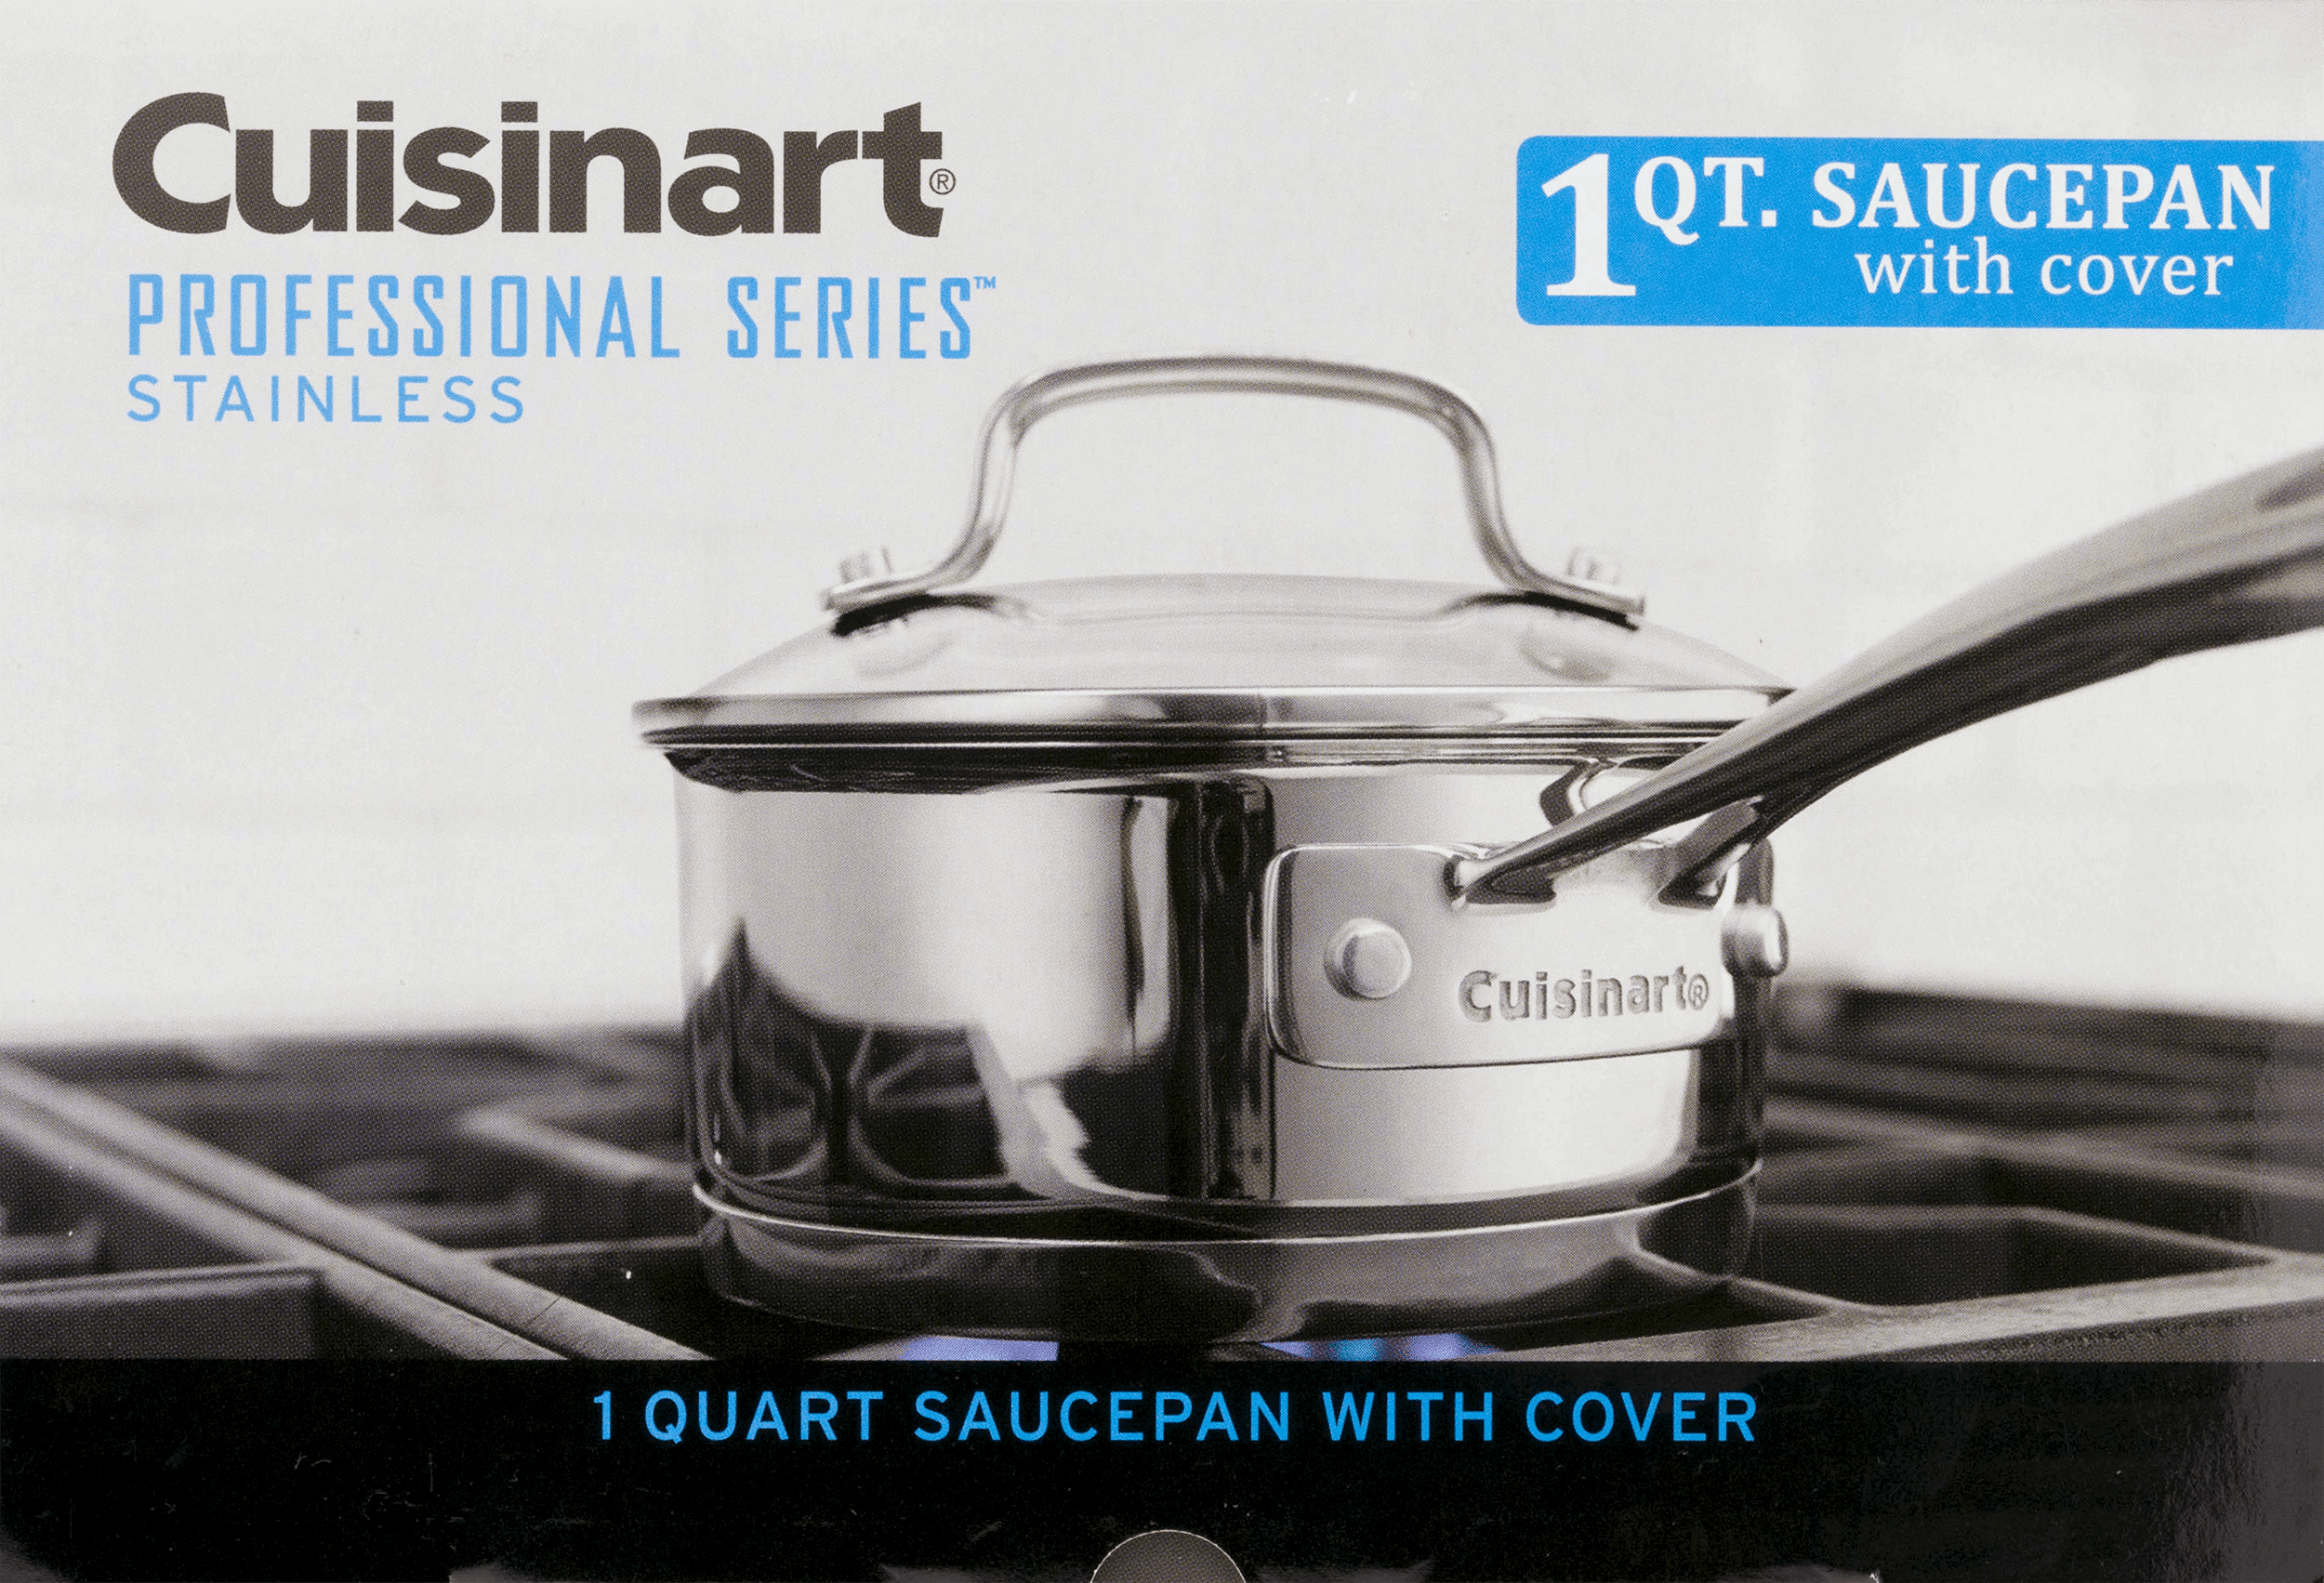 Cuisinart Classic Stainless Steel Sauce Pan 1.5 qt with Lid/Cover-Model  #819-16T